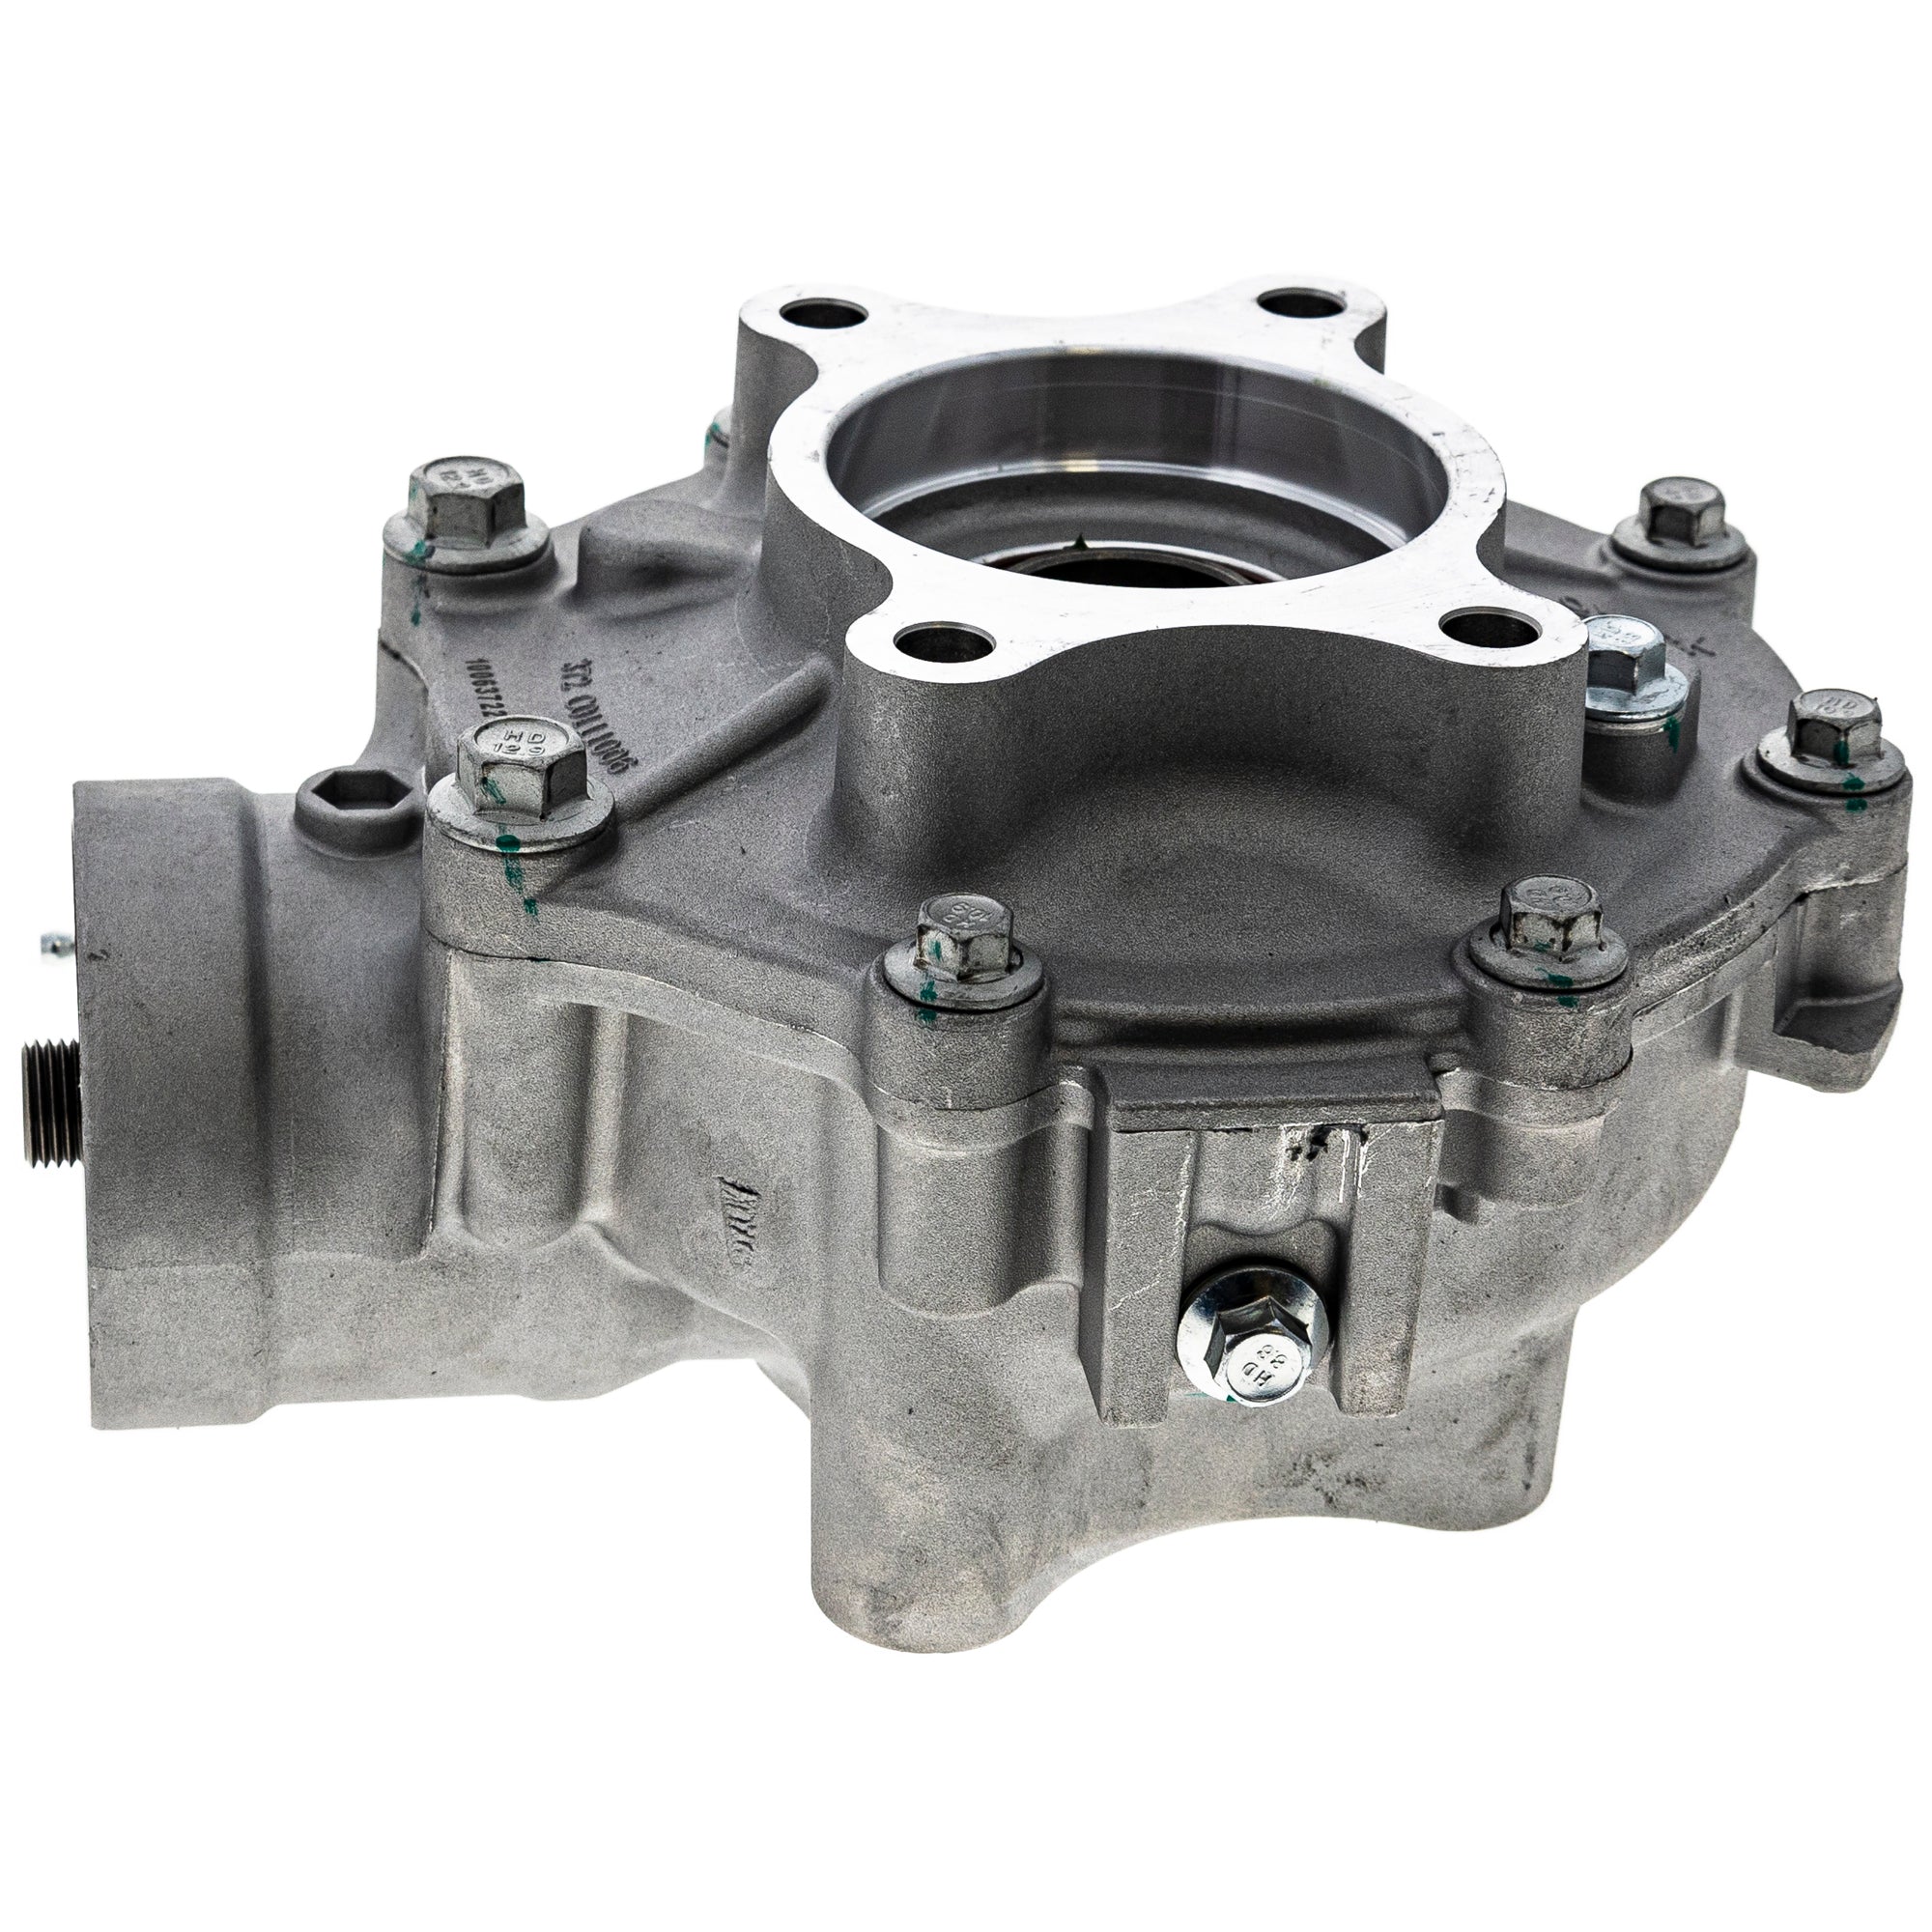 Rear Differential Assembly 519-CDI2233F For Honda 41300-HR3-WB0 41300-HR3-W50 41300-HR3-A20